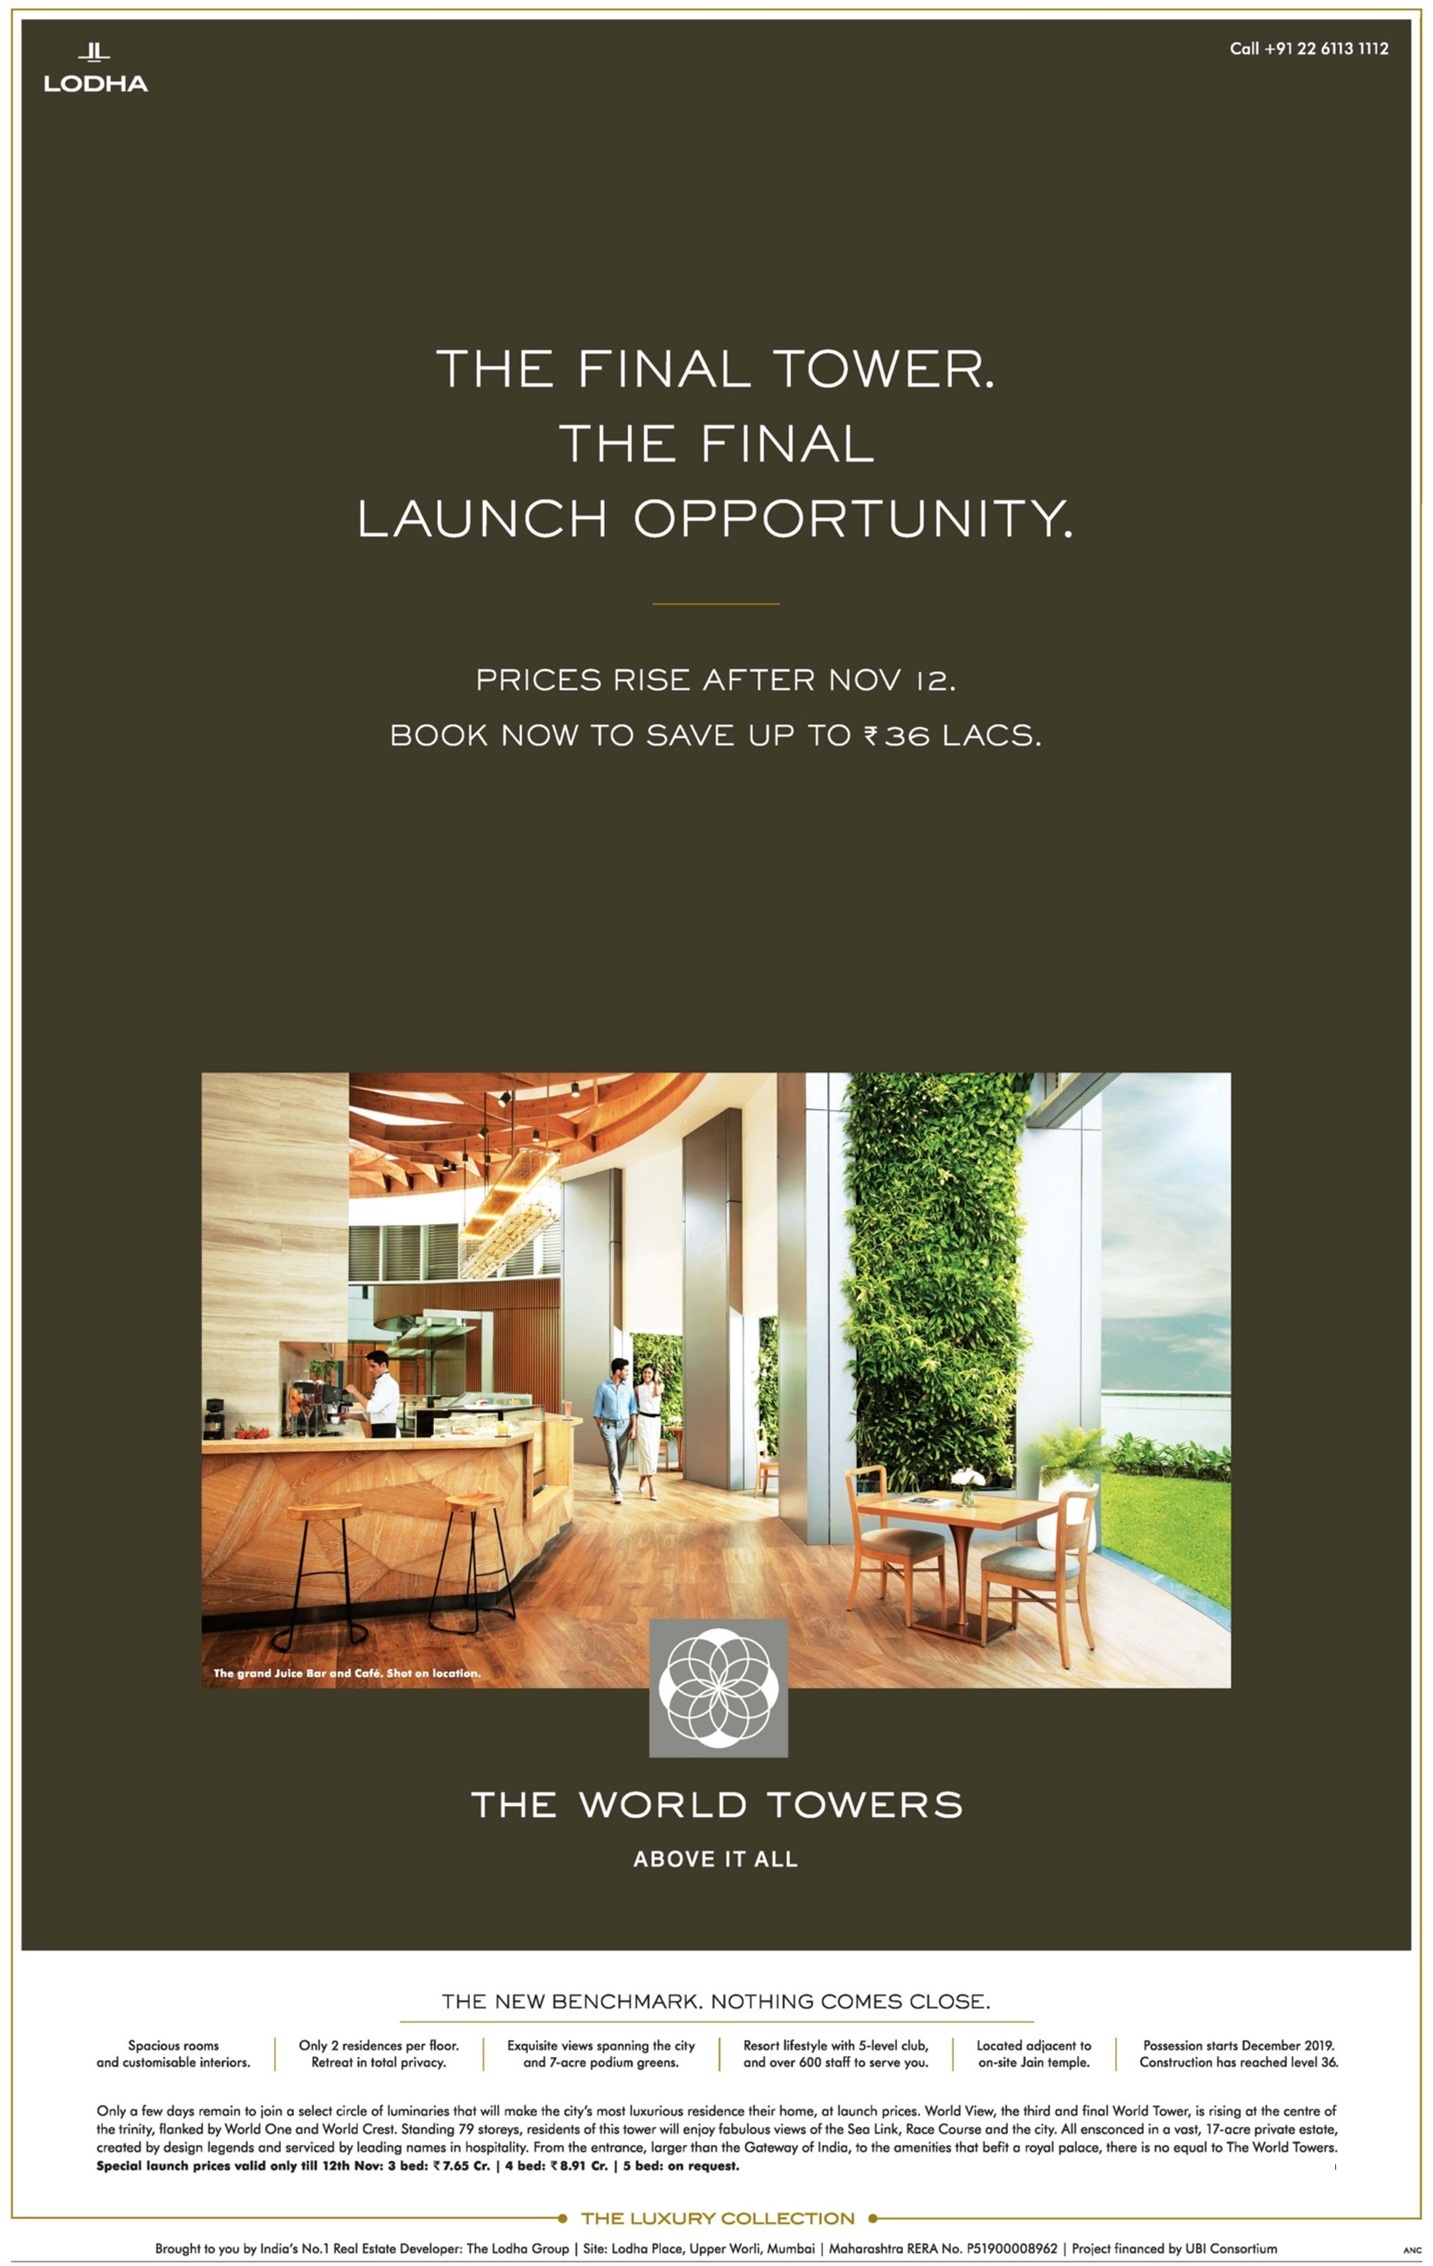 The final launch opportunity for home buyers at the final tower of The World Towers in Mumbai